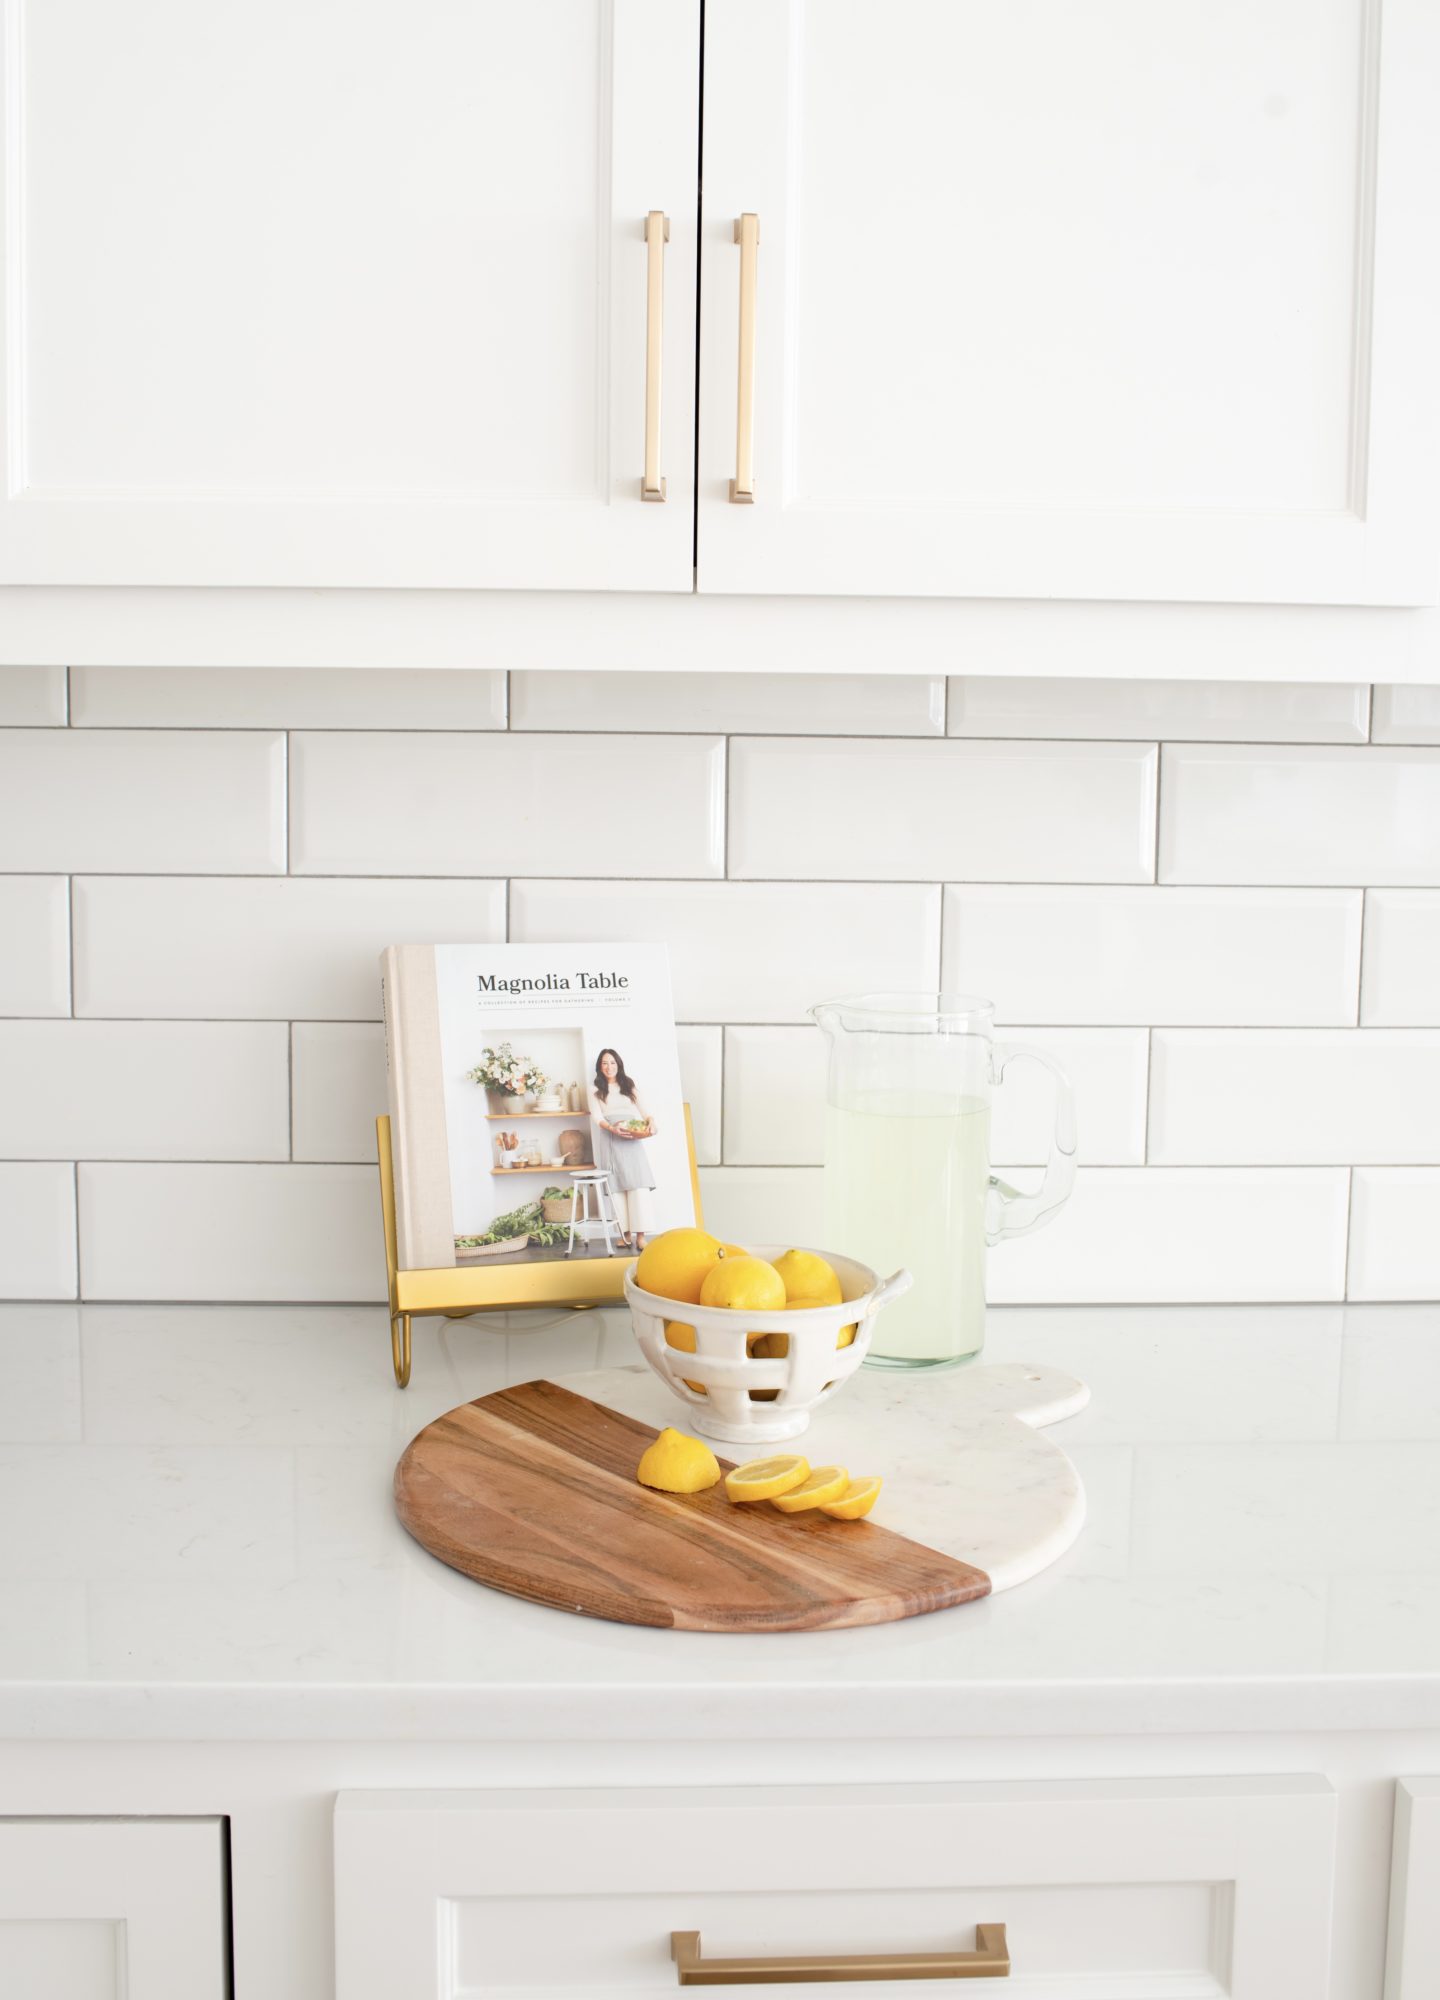 Lindsay's White & Gold Kitchen Remodel Reveal! - The Double Take Girls